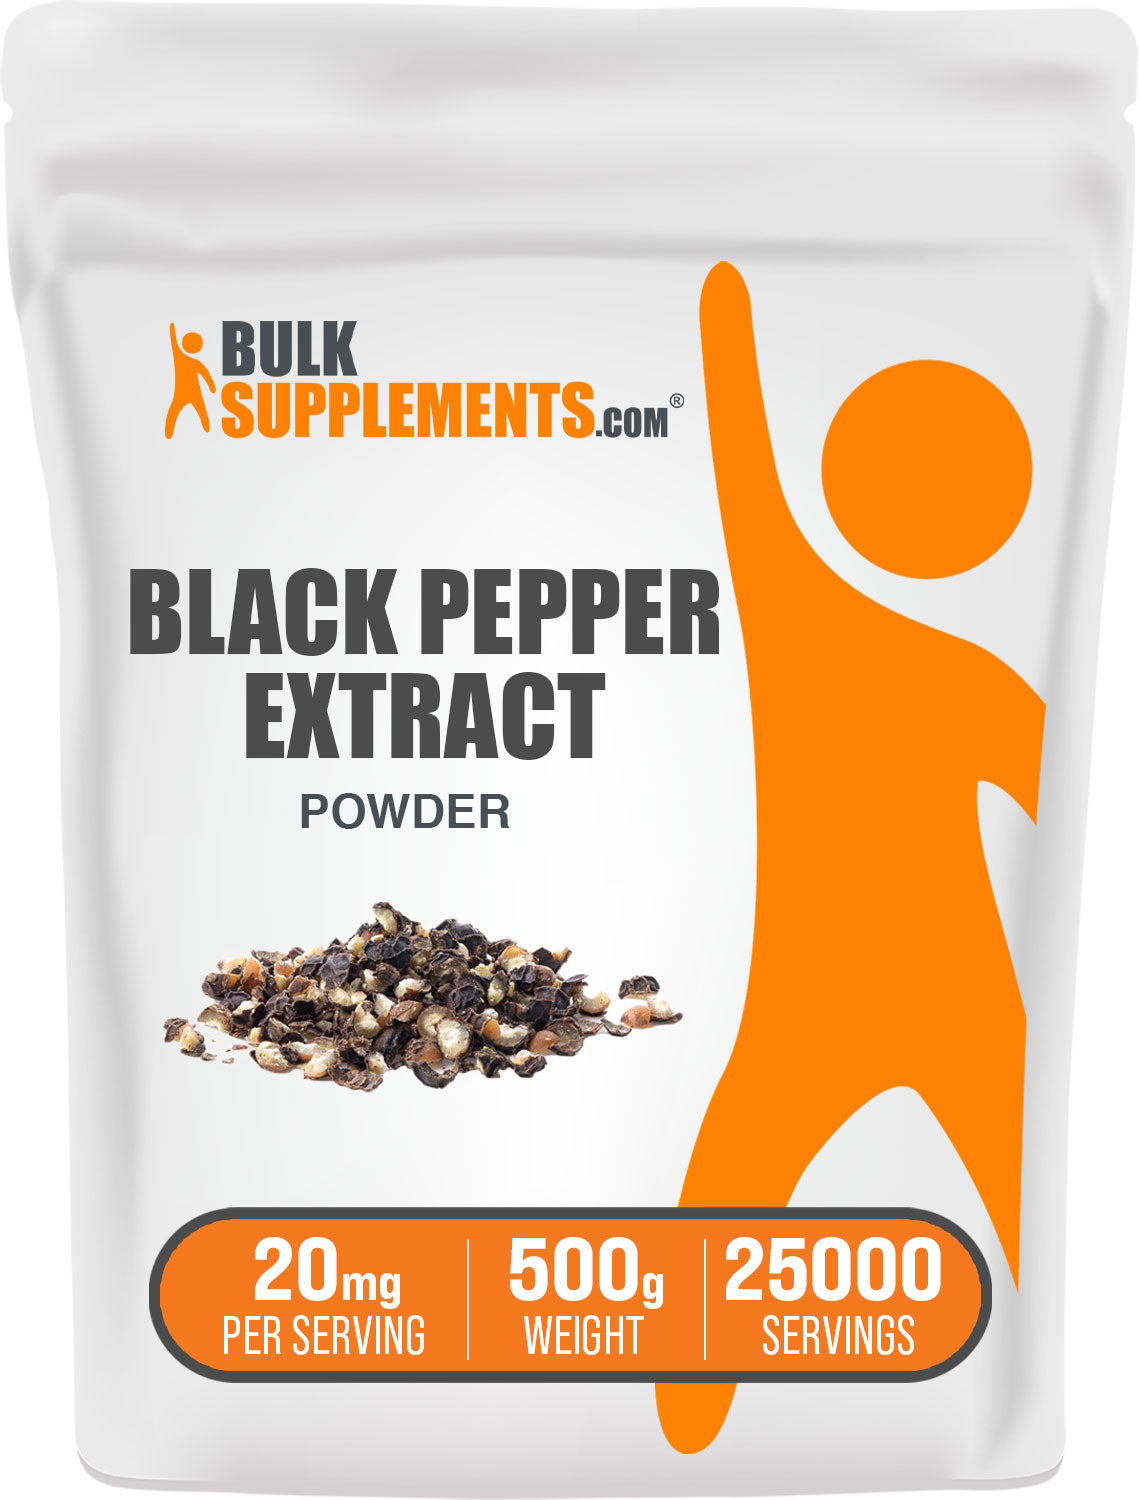 500g bag of black pepper extract